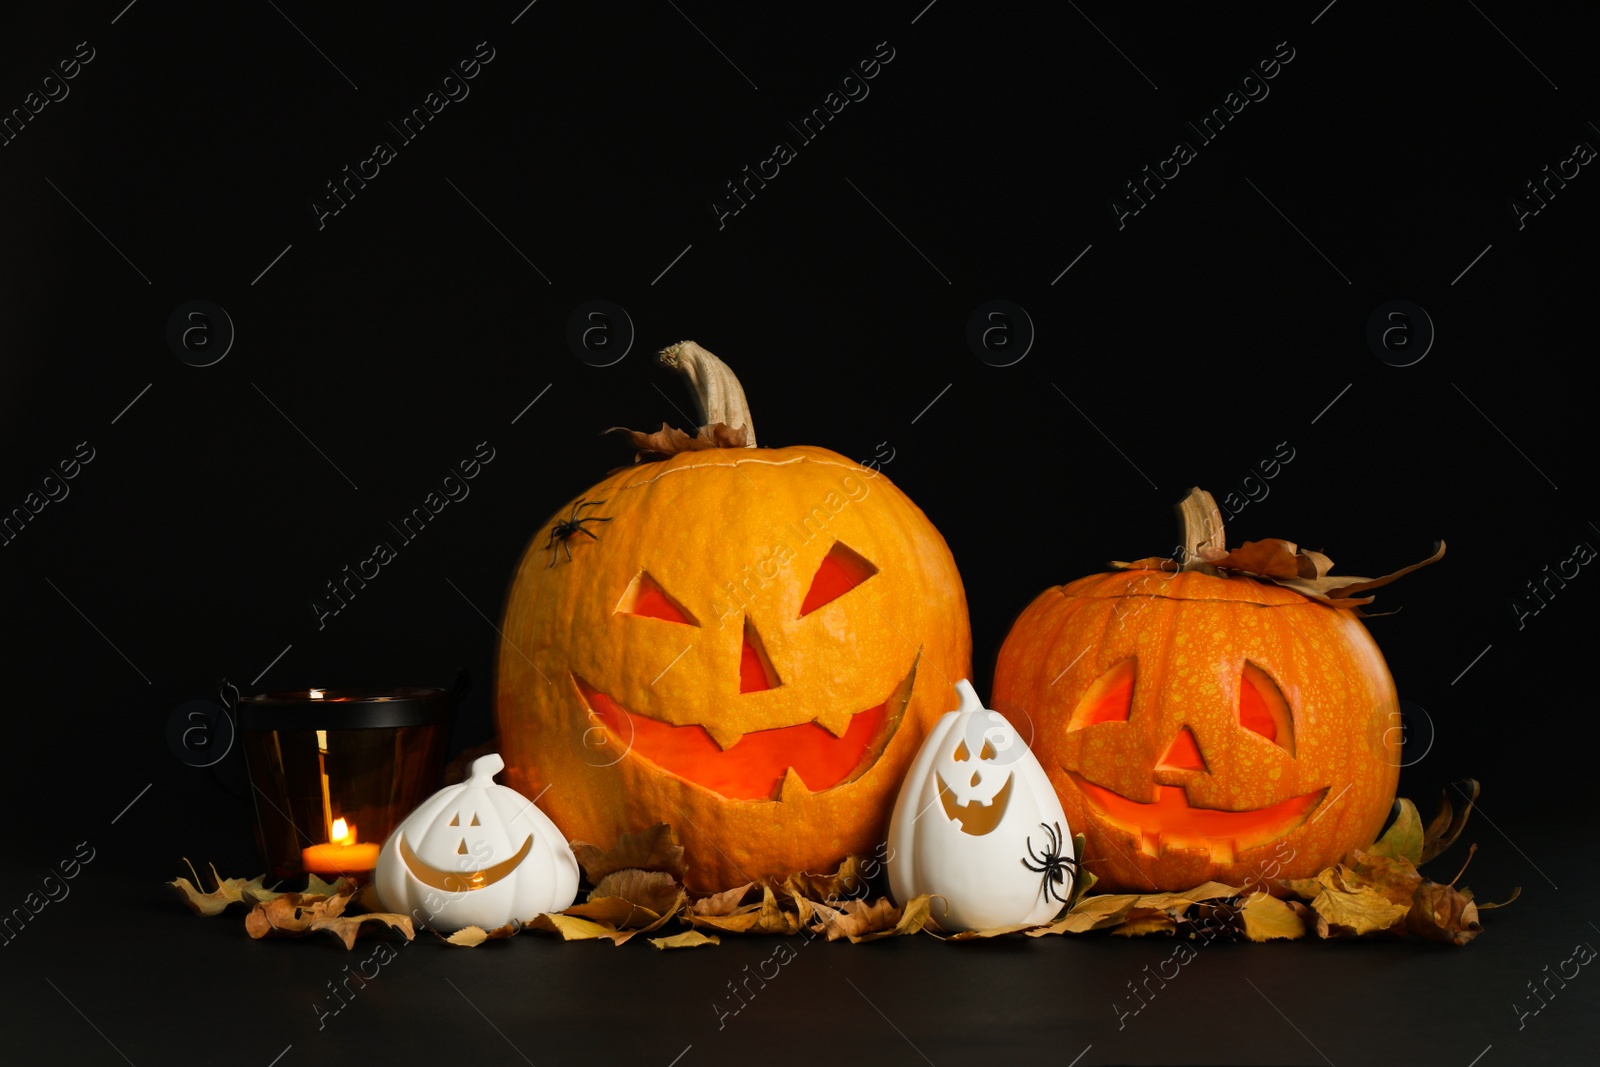 Photo of Composition with pumpkin heads on black background. Jack lantern - traditional Halloween decor